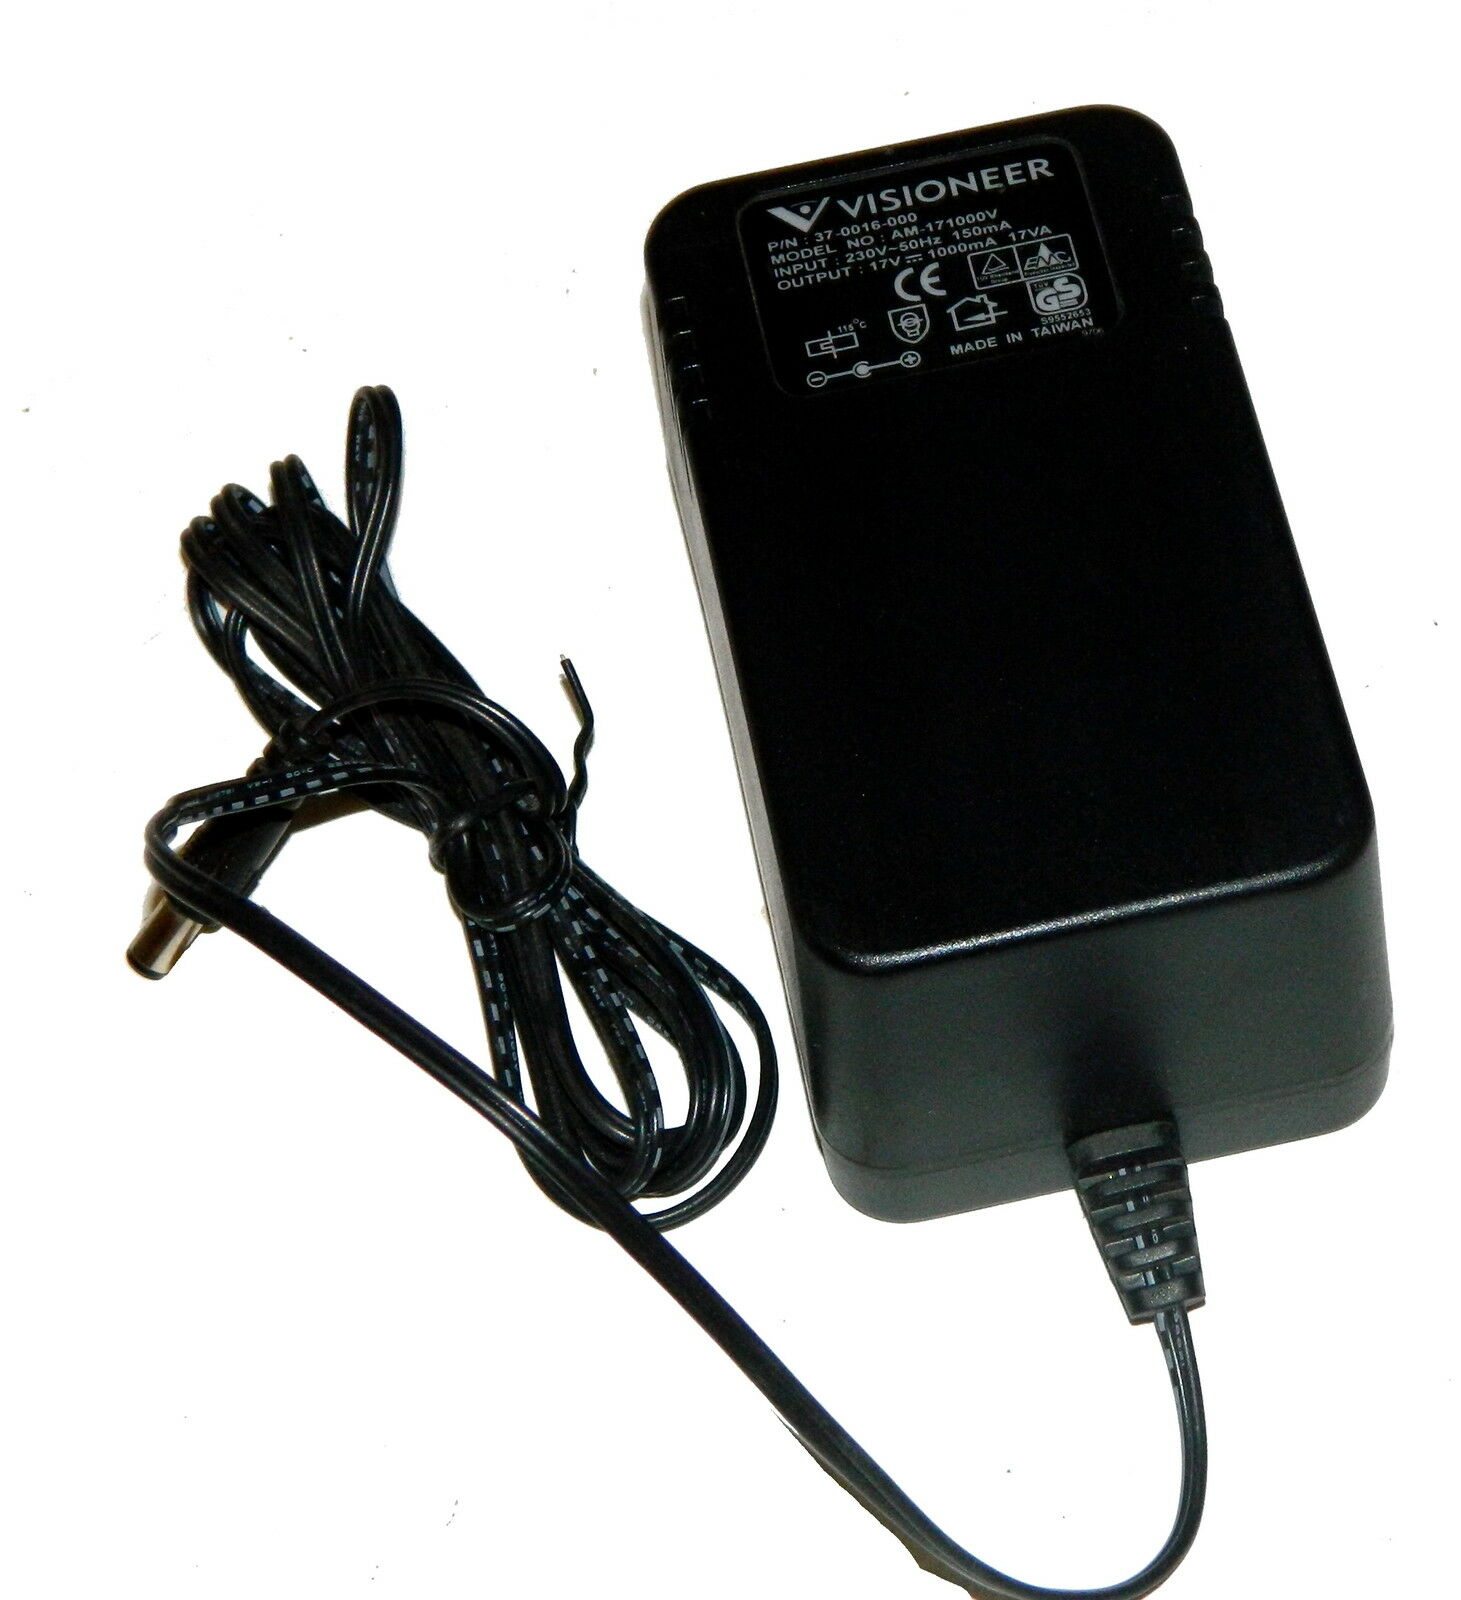 NEW Visioneer 37-0016-000 17VDC 1.0A AM-171000V AC Adapter Specification: Brand :Visioneer MODEL